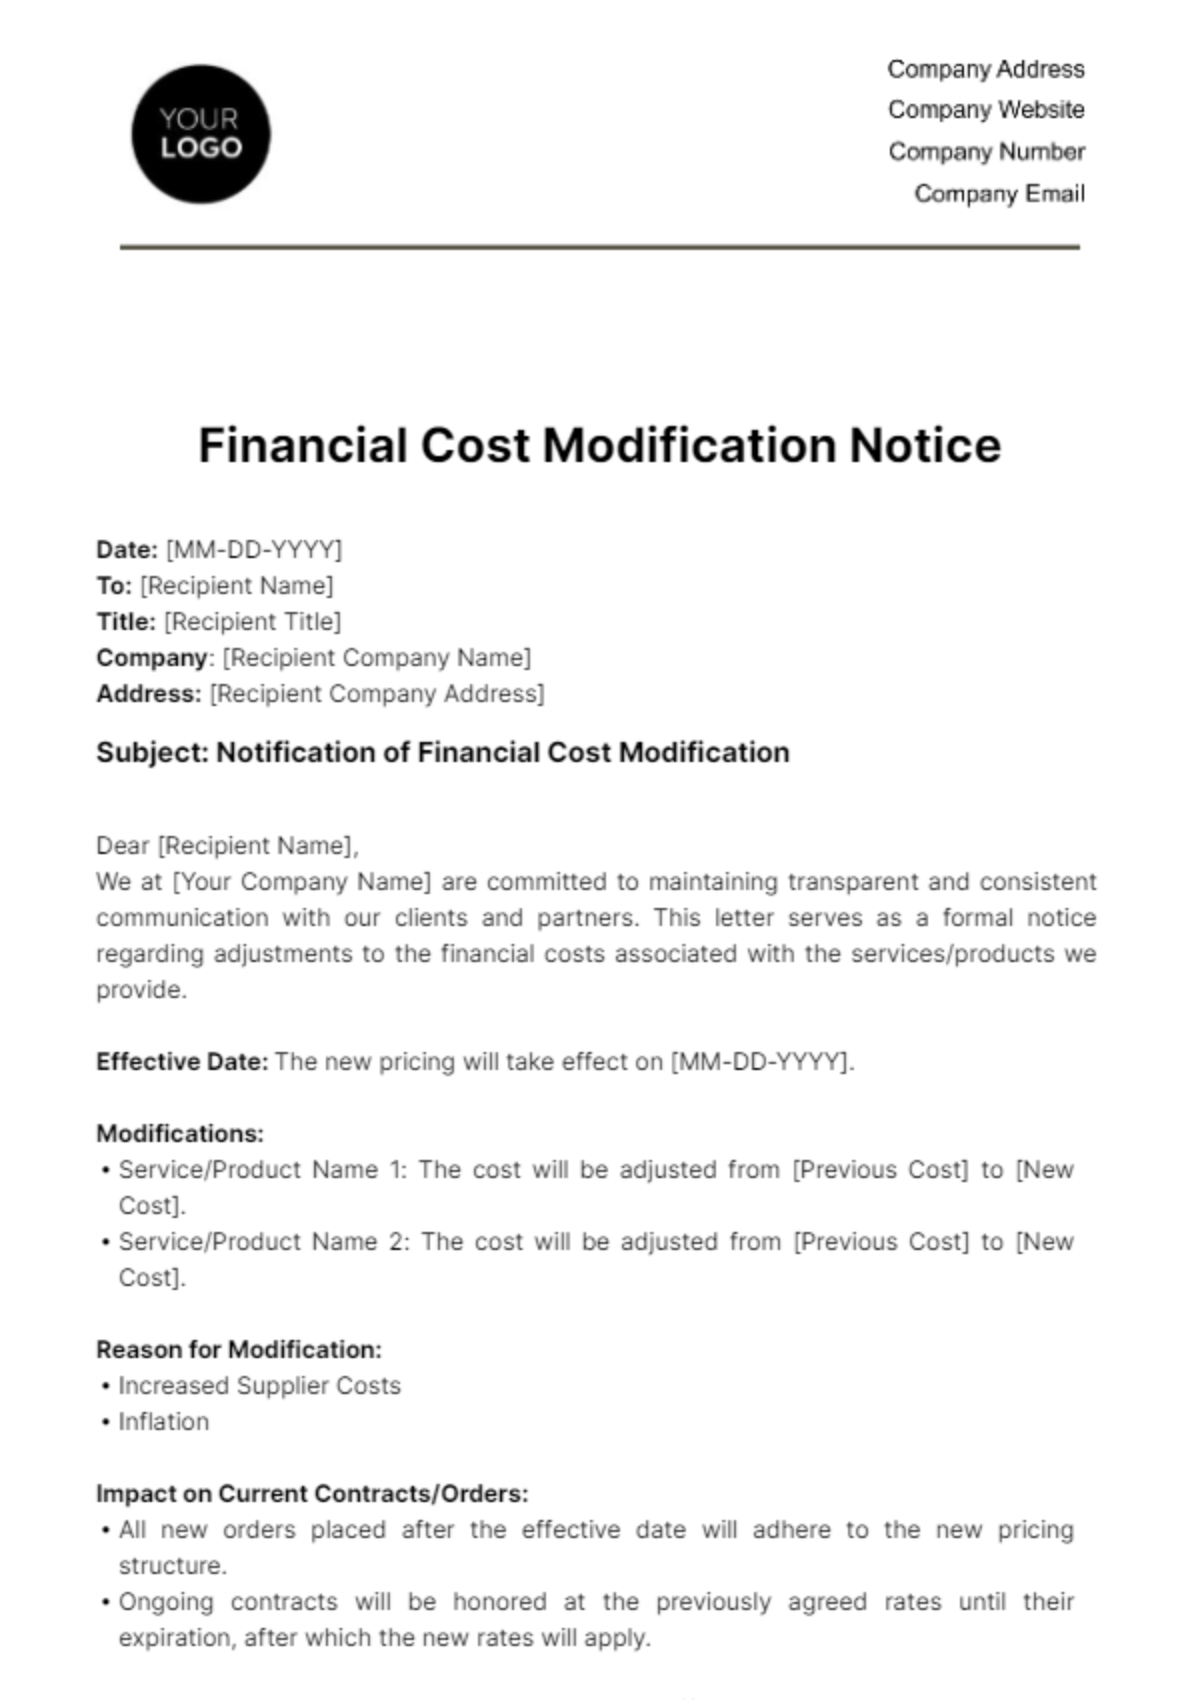 Financial Cost Modification Notice Template